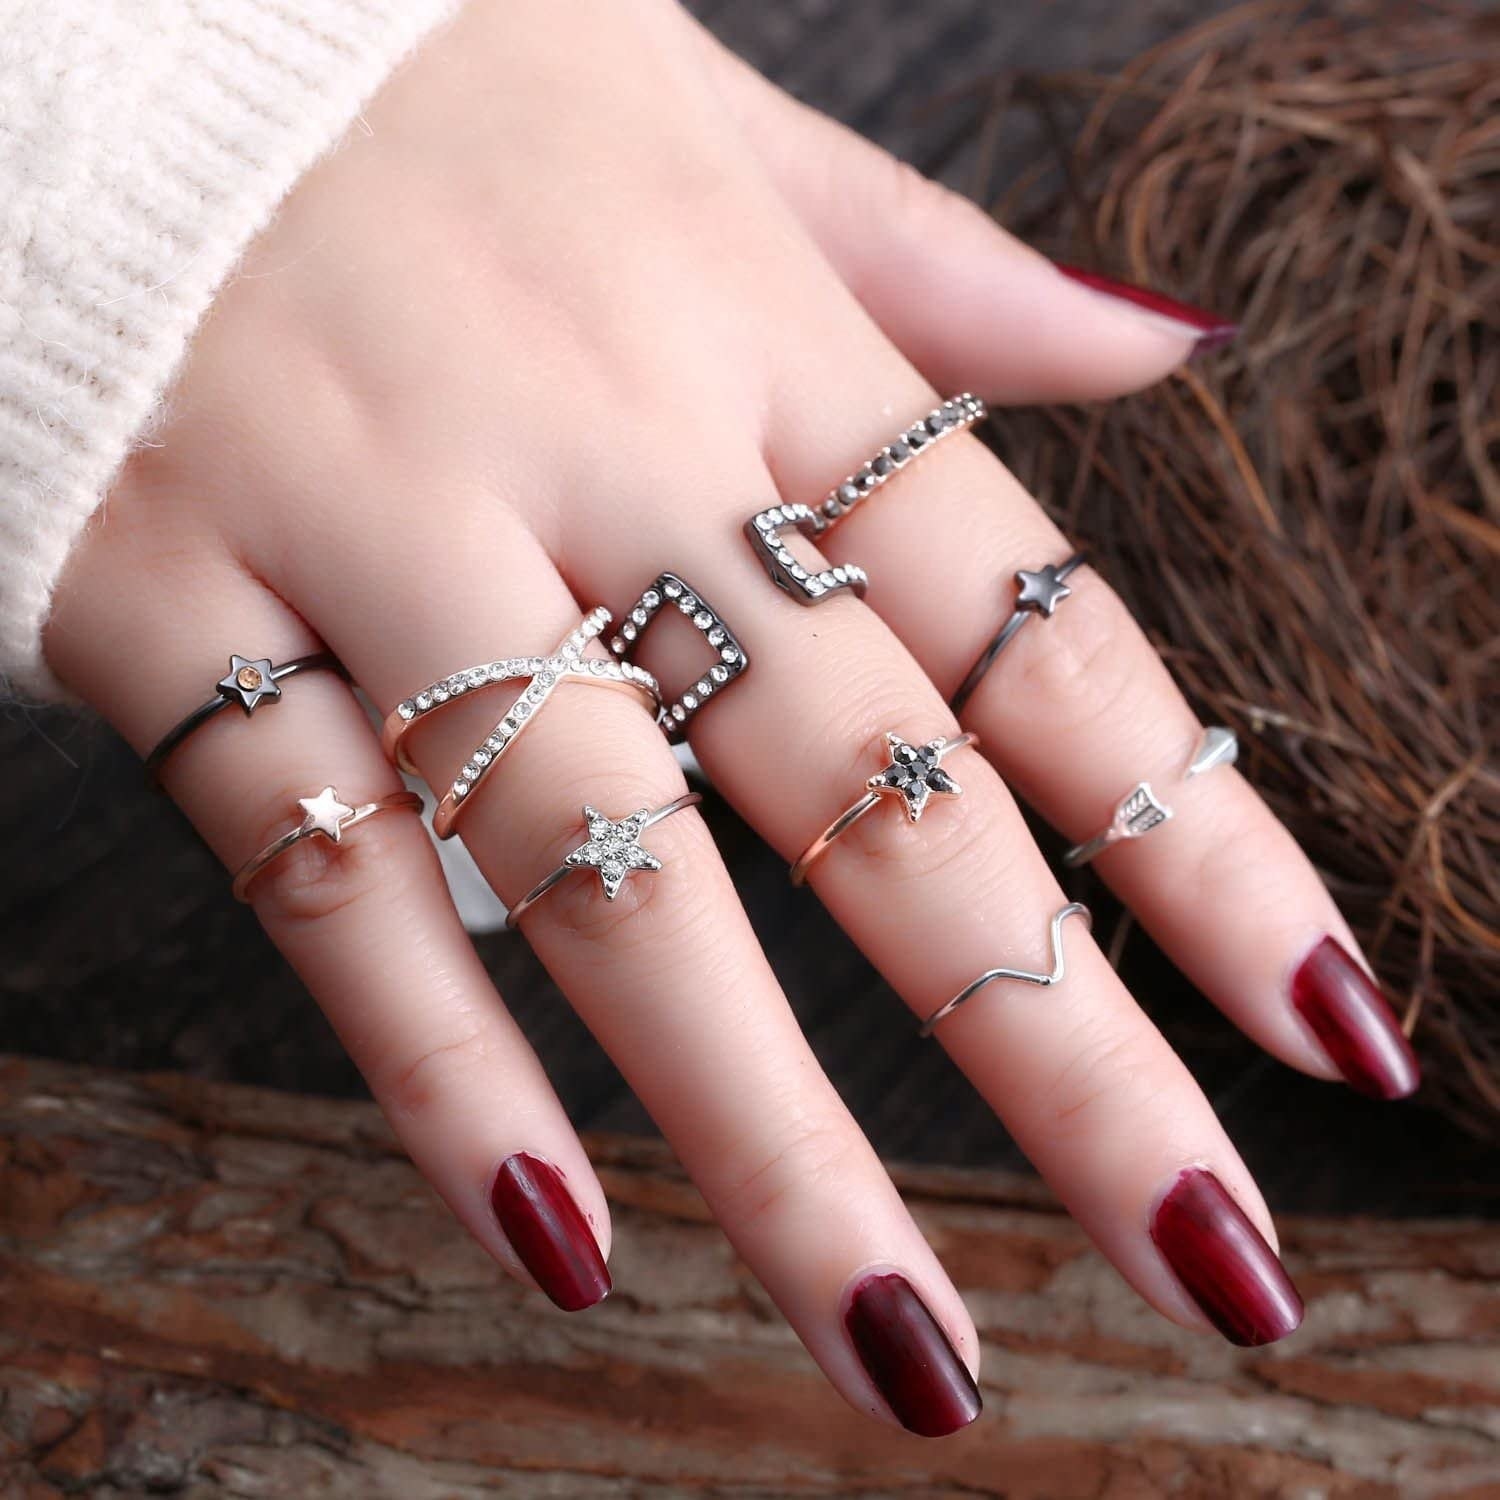 the rings on a hand, some are knuckle rings and some are midi rings